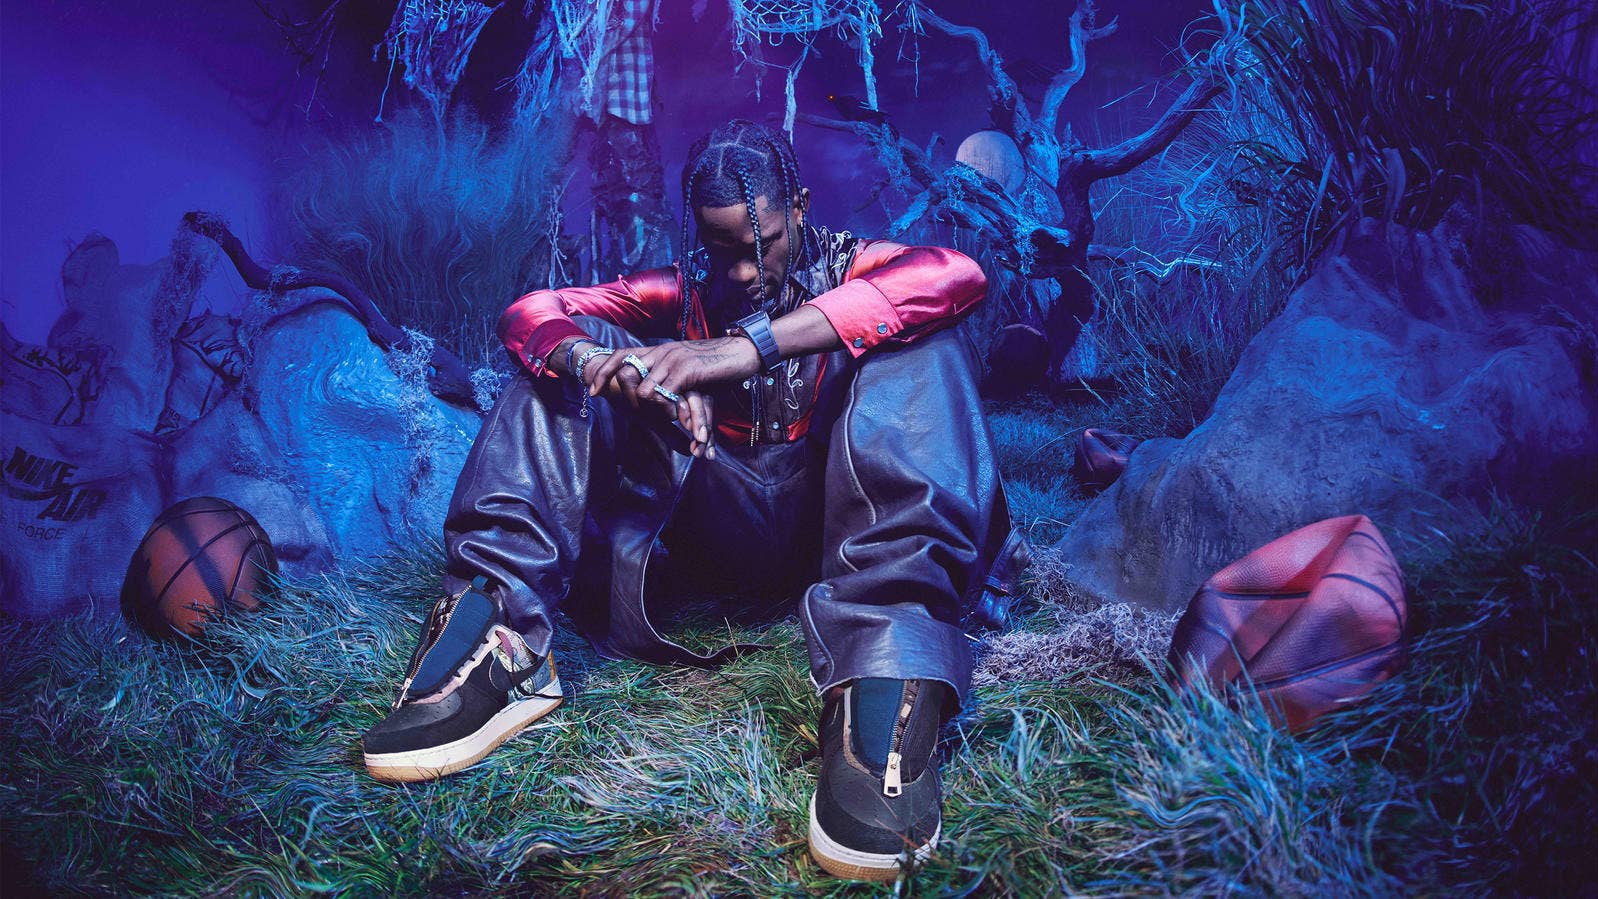 Nike Needs to Put Travis Scott Collabs on Pause